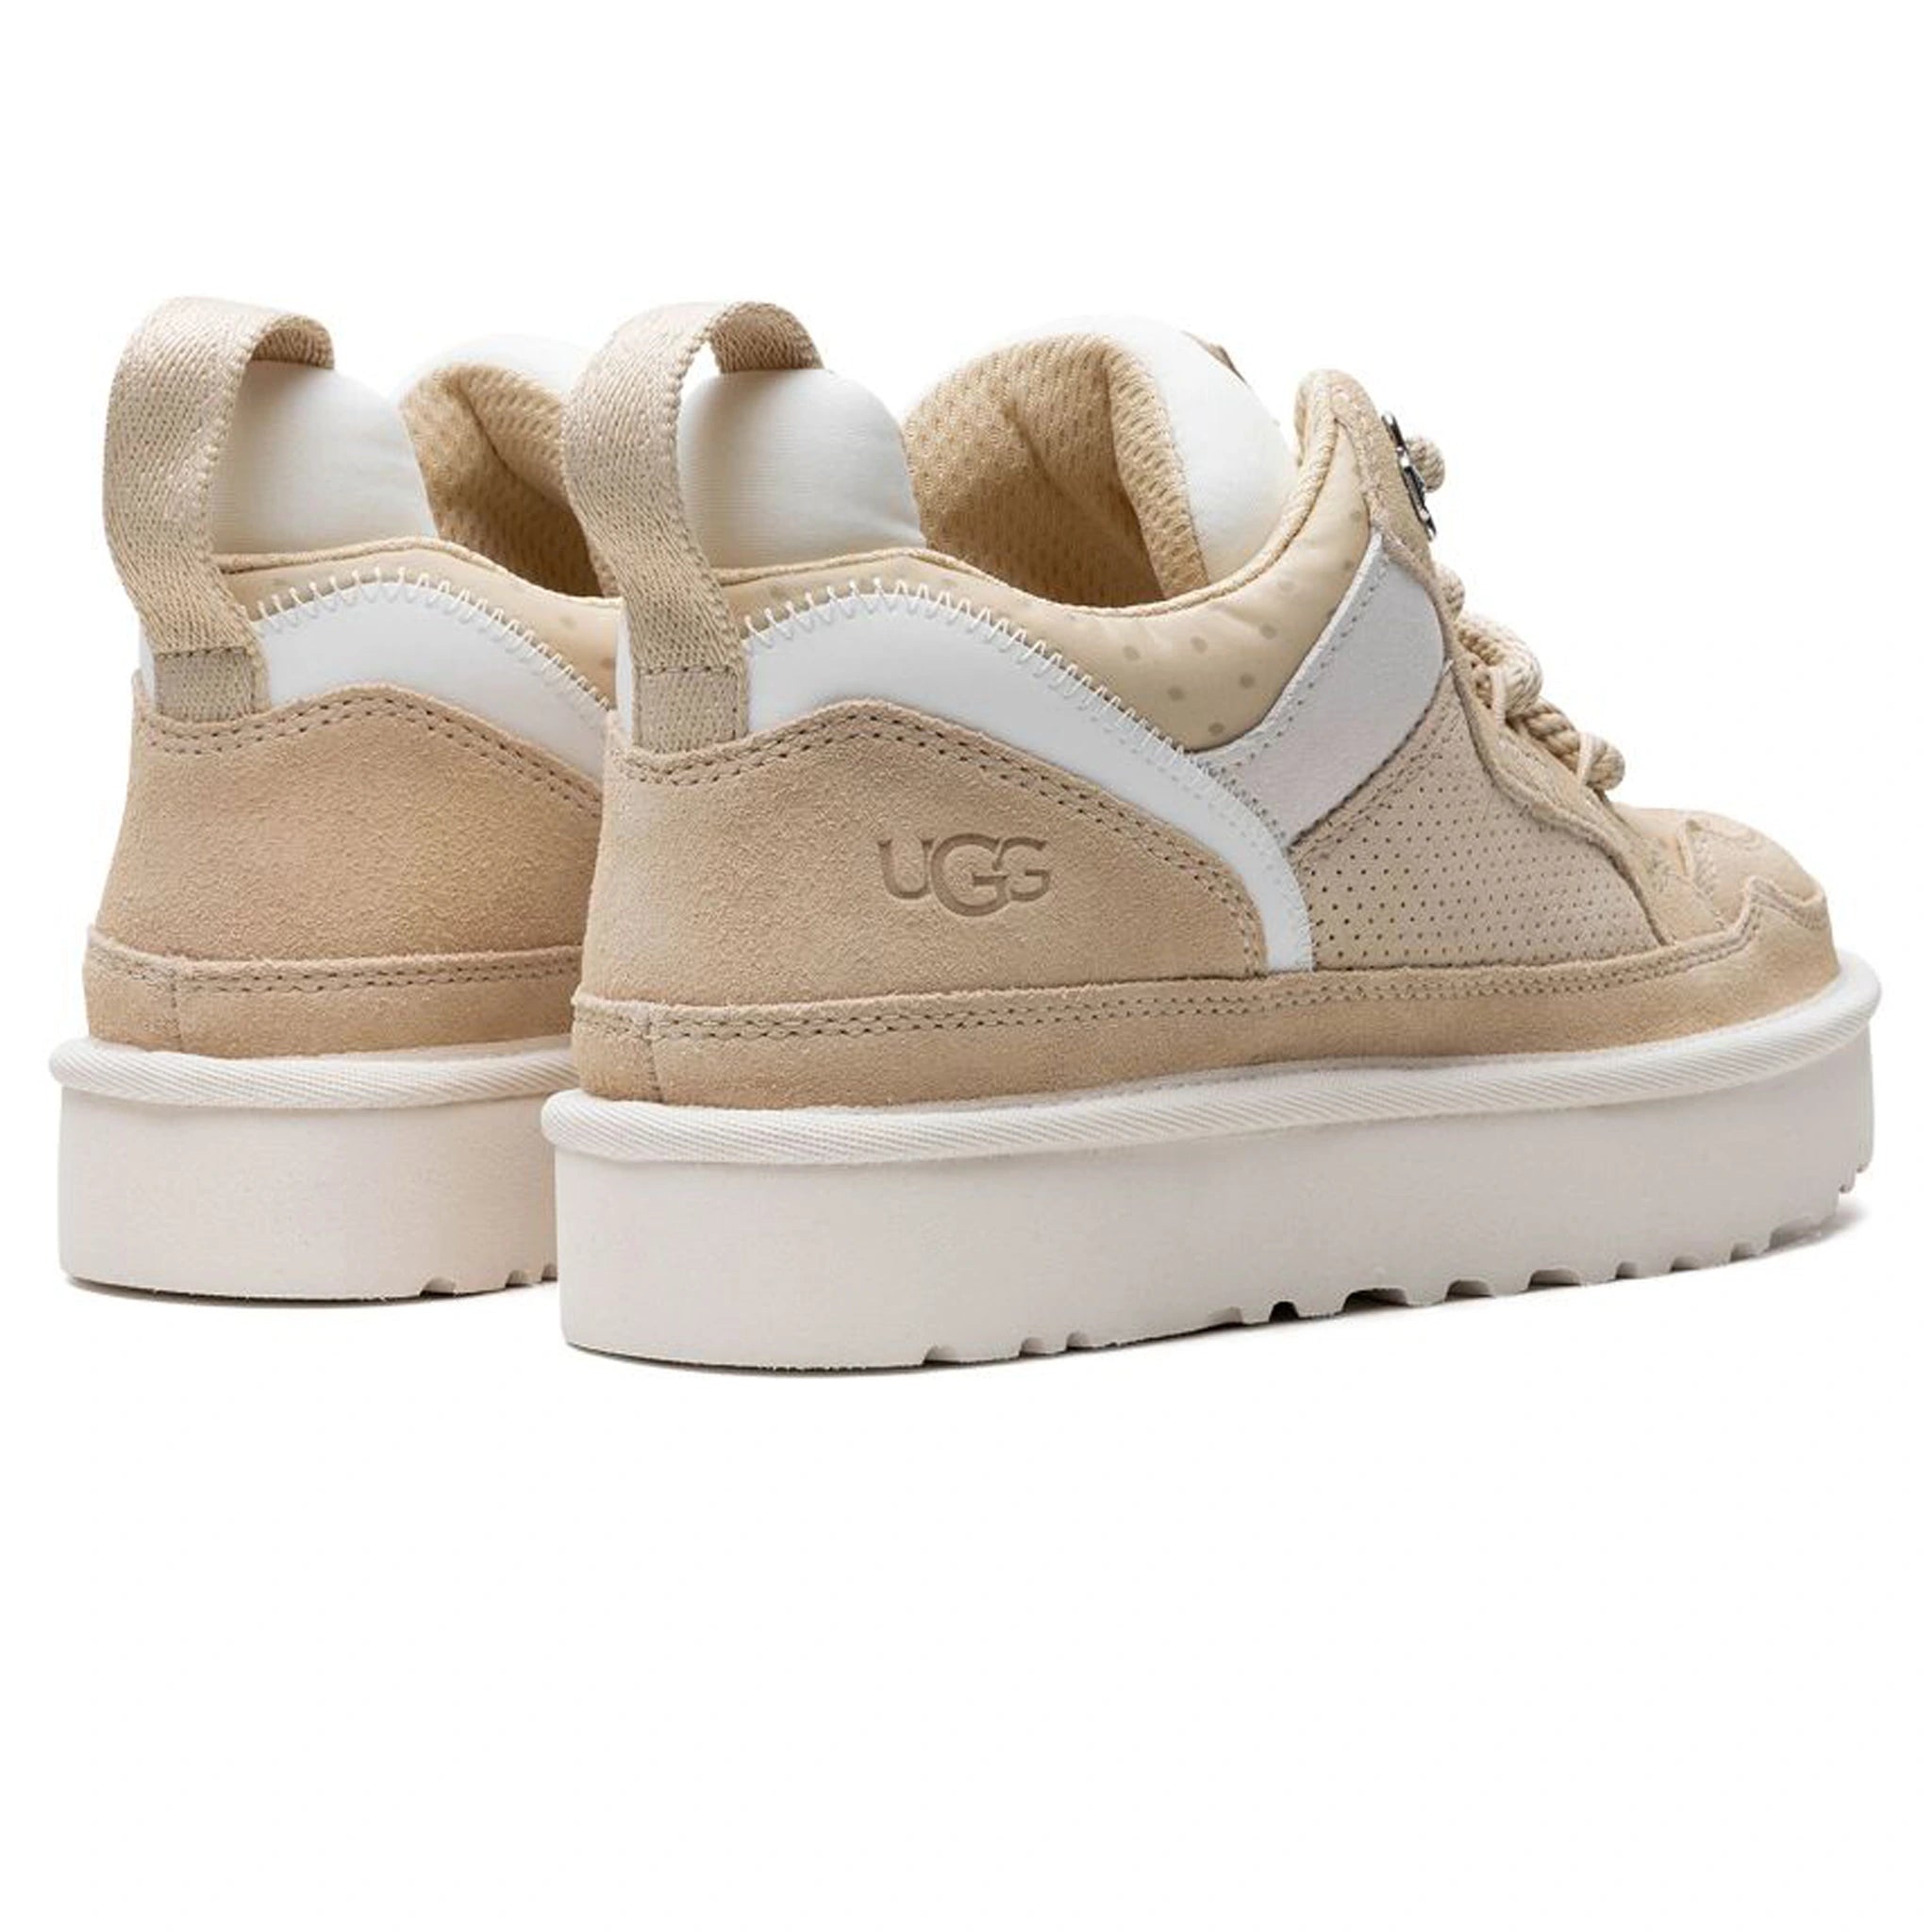 Back view of UGG Lowmel Trainer Spring Biscotti (W) 1152759-BSCT